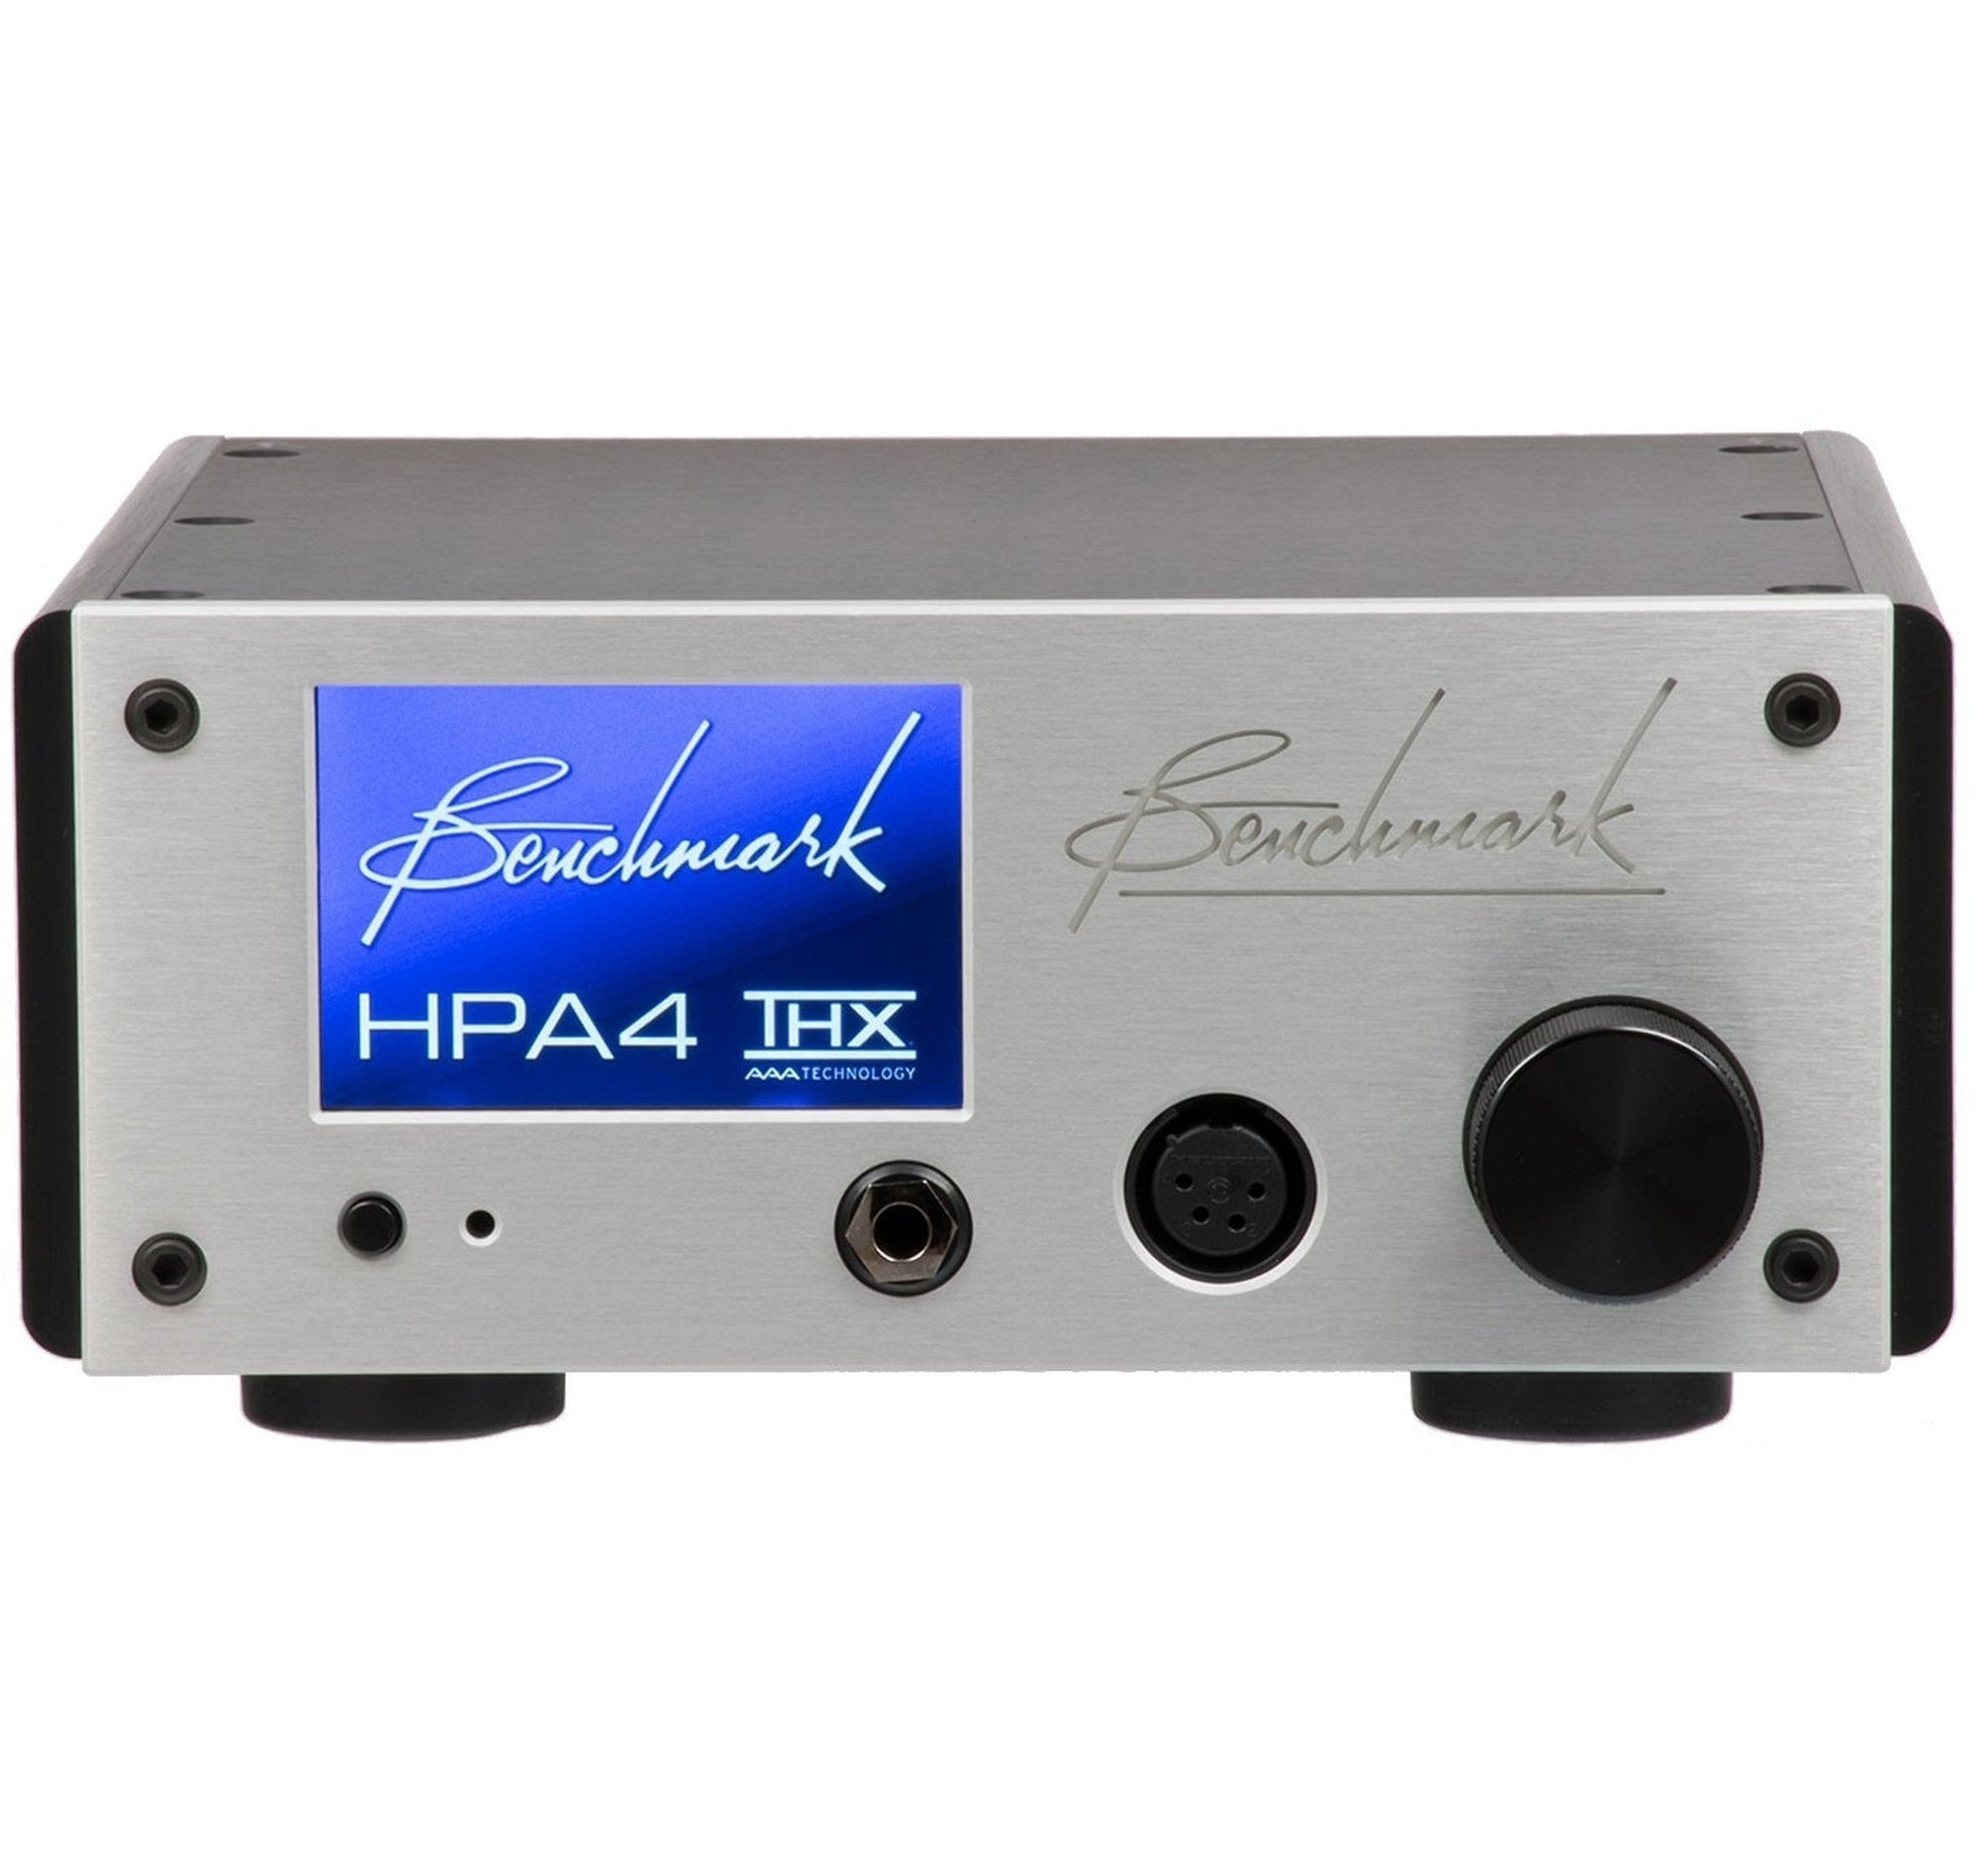 Benchmark HPA4 Silver - front view